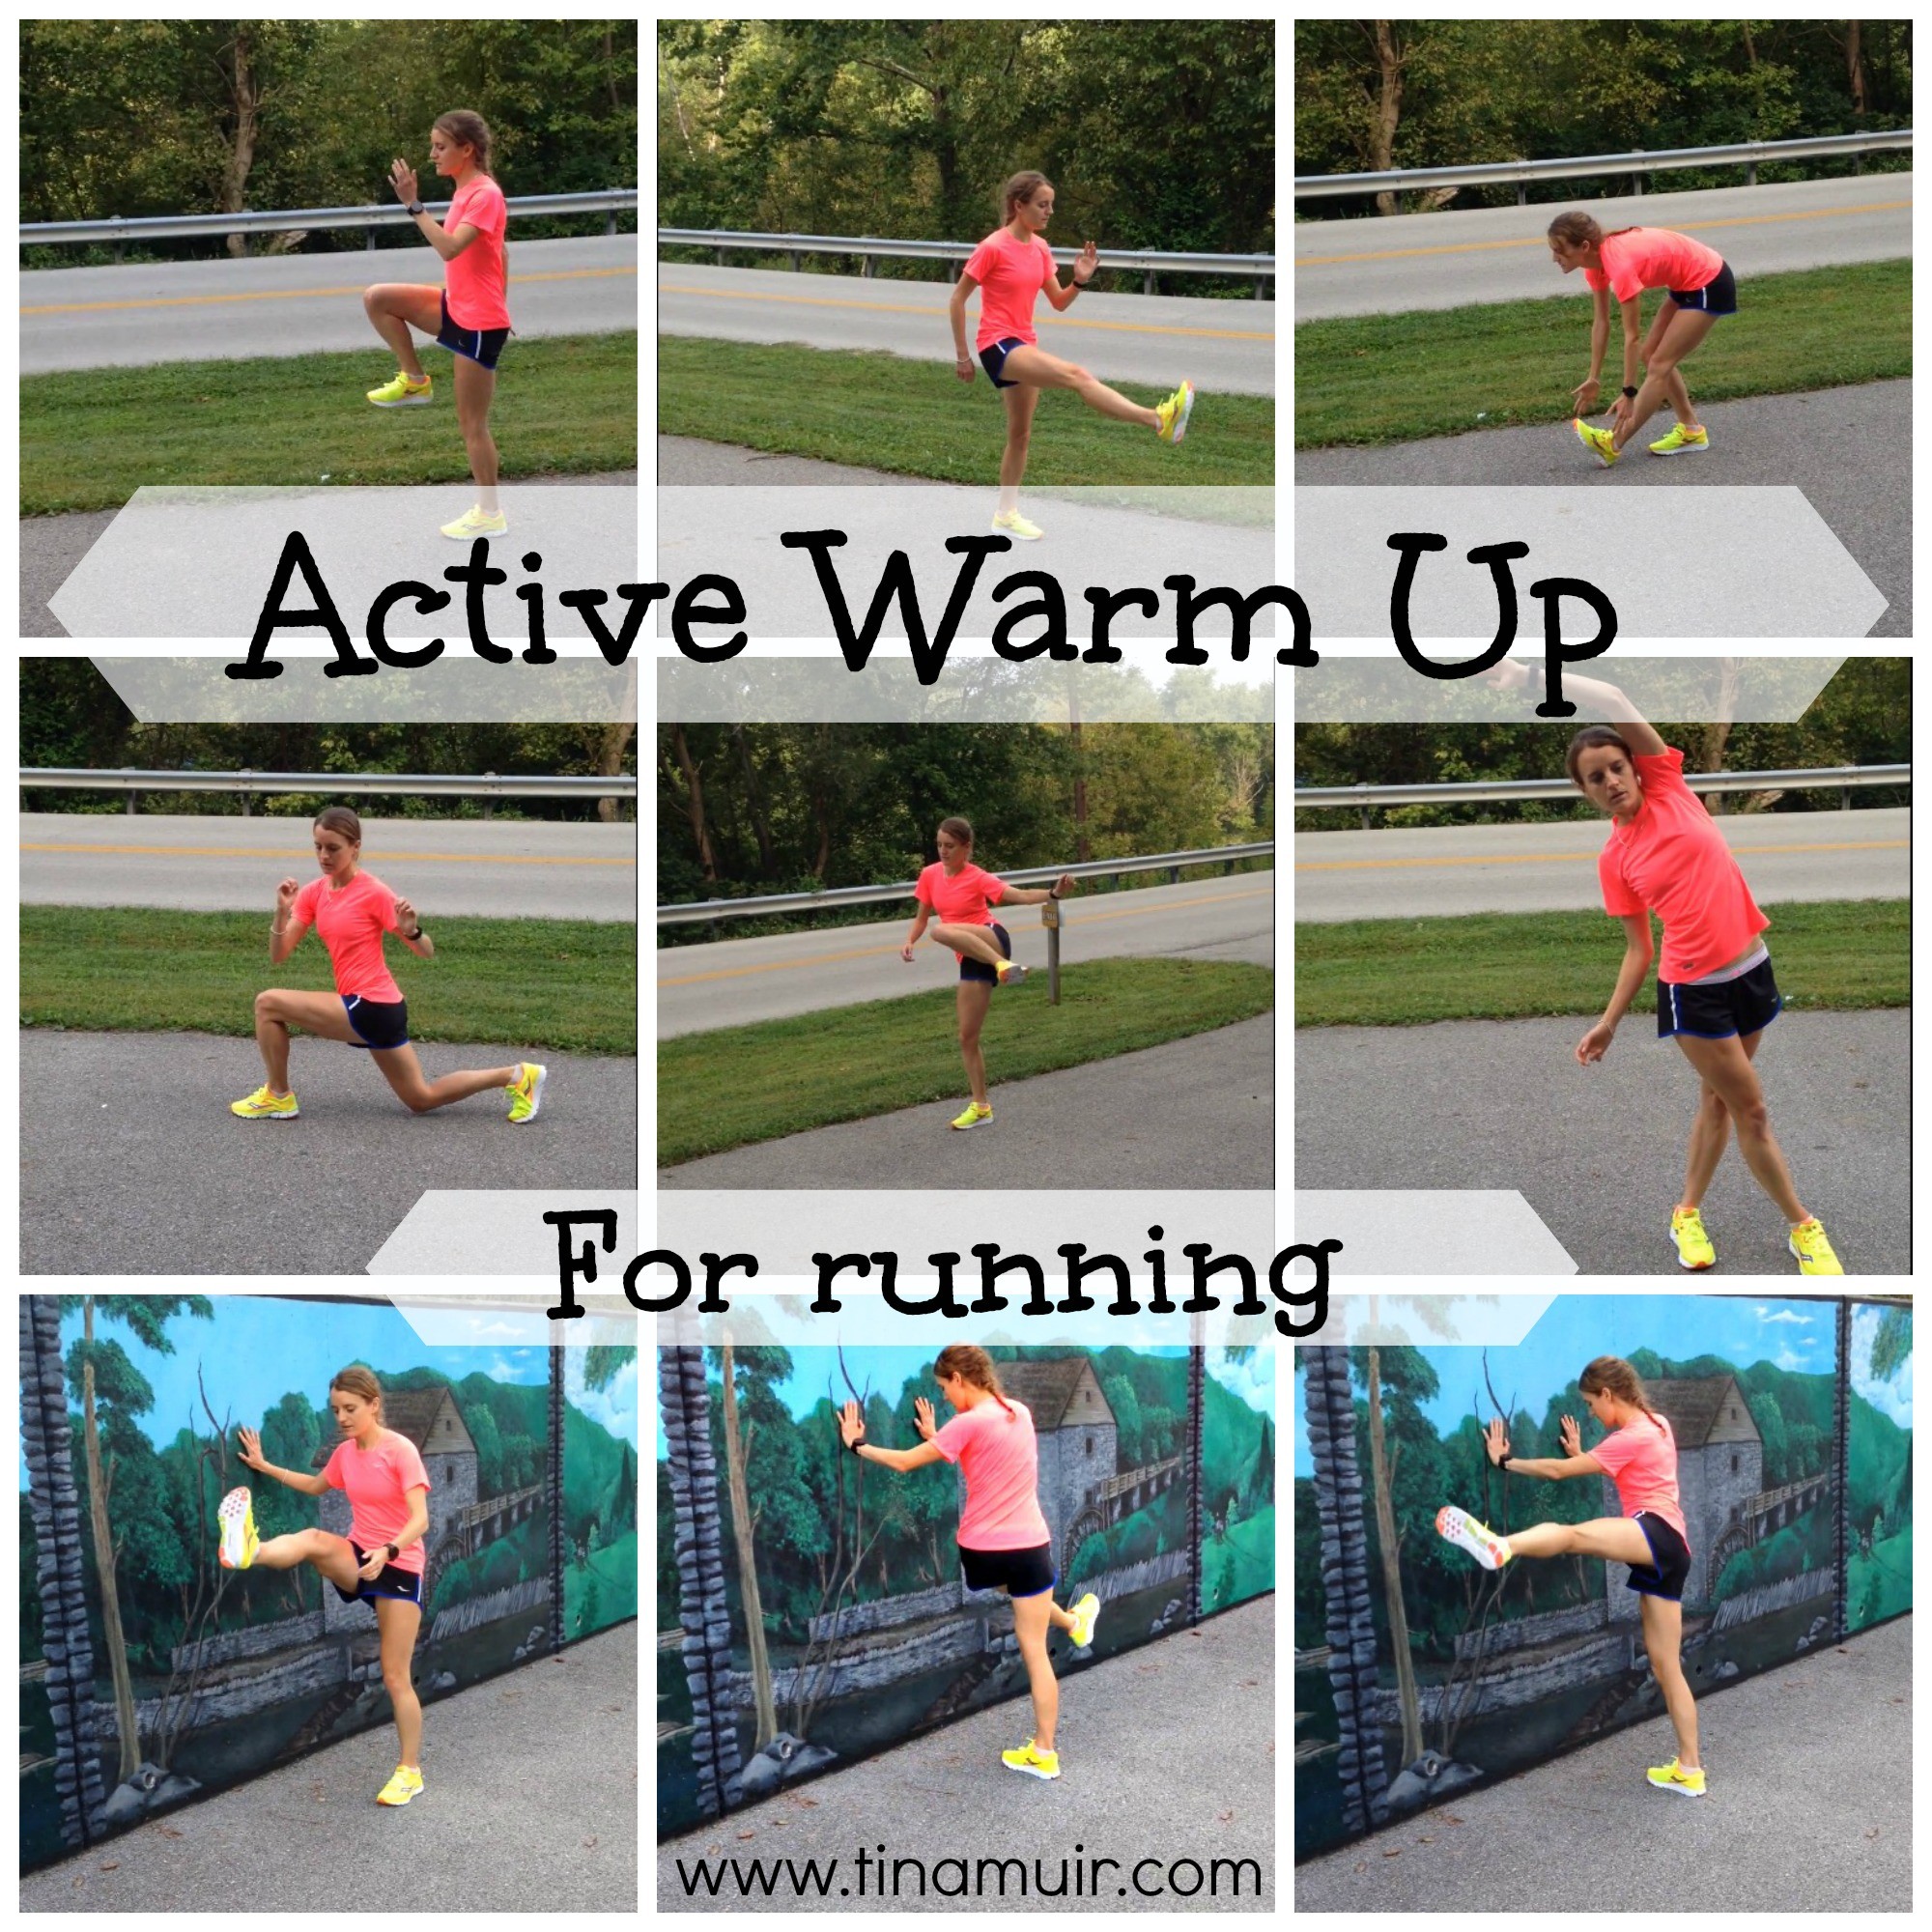 Elite Athlete Tina Muir shares her Secrets to Success: Active Warm Up. These video demonstrations are really easy to follow, and help you feel much better on your runs!